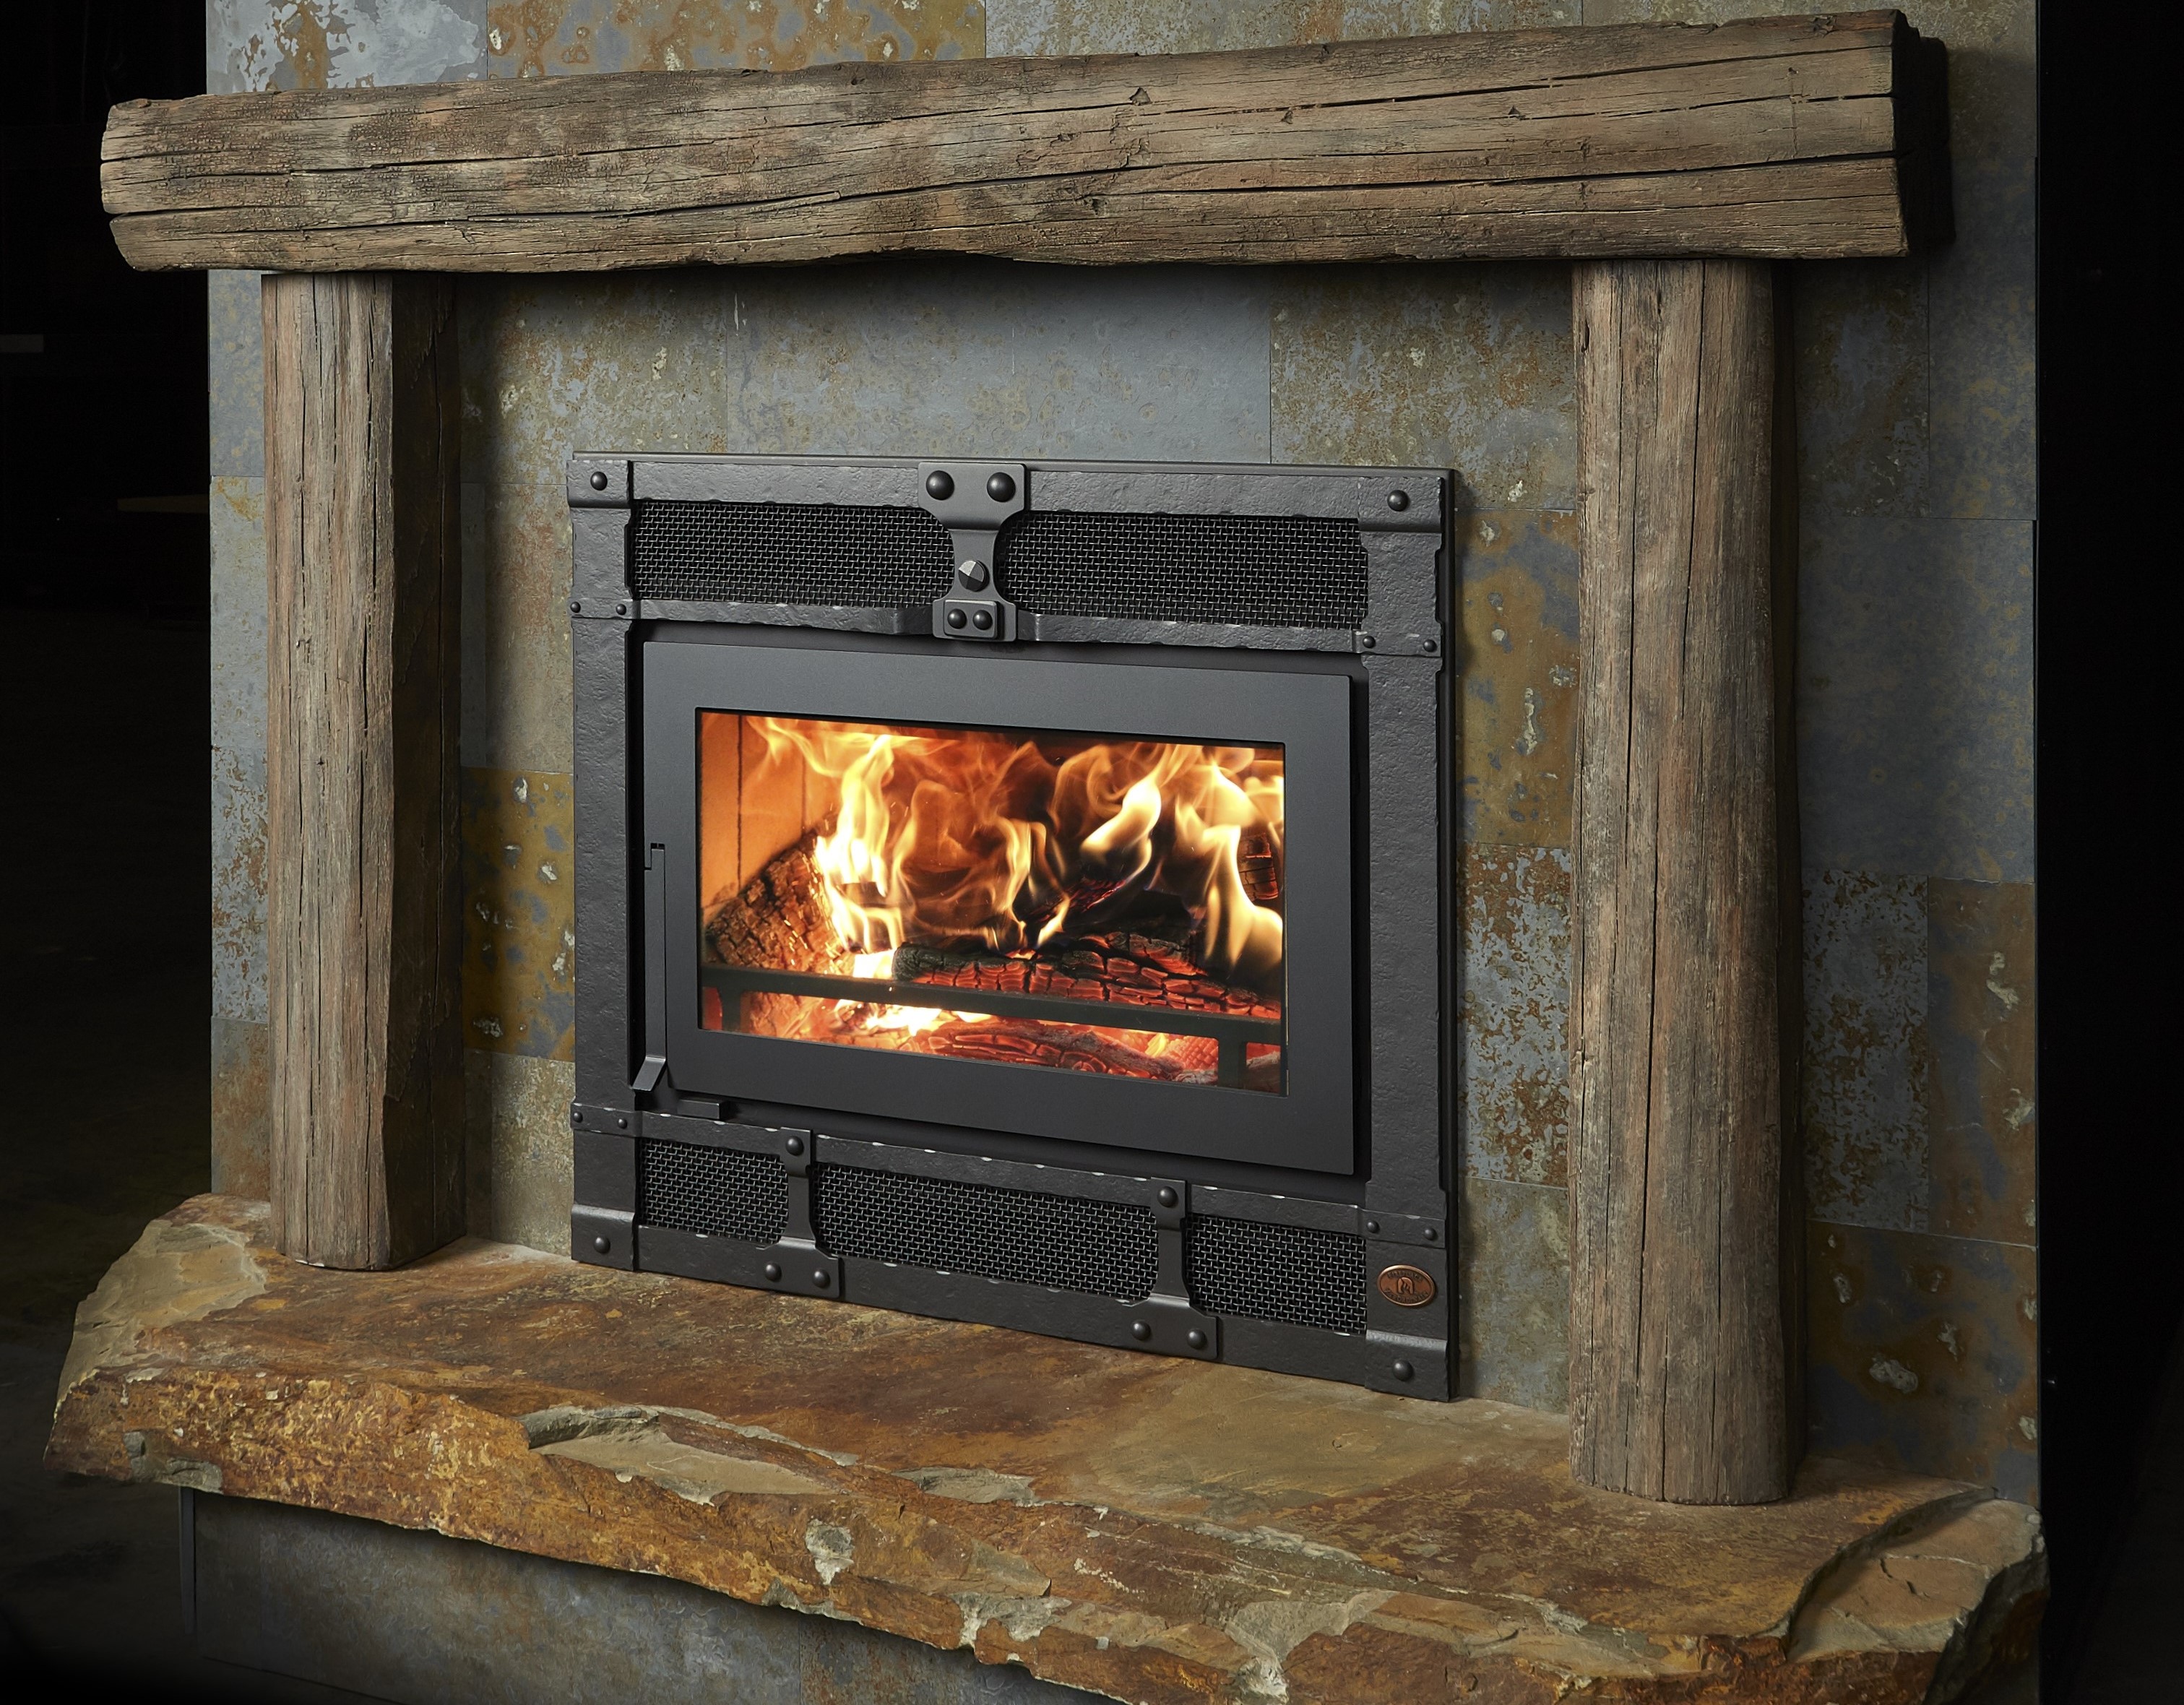 Image of a Travis Industries Wood Fireplaces which links to our Wood Fireplace page.